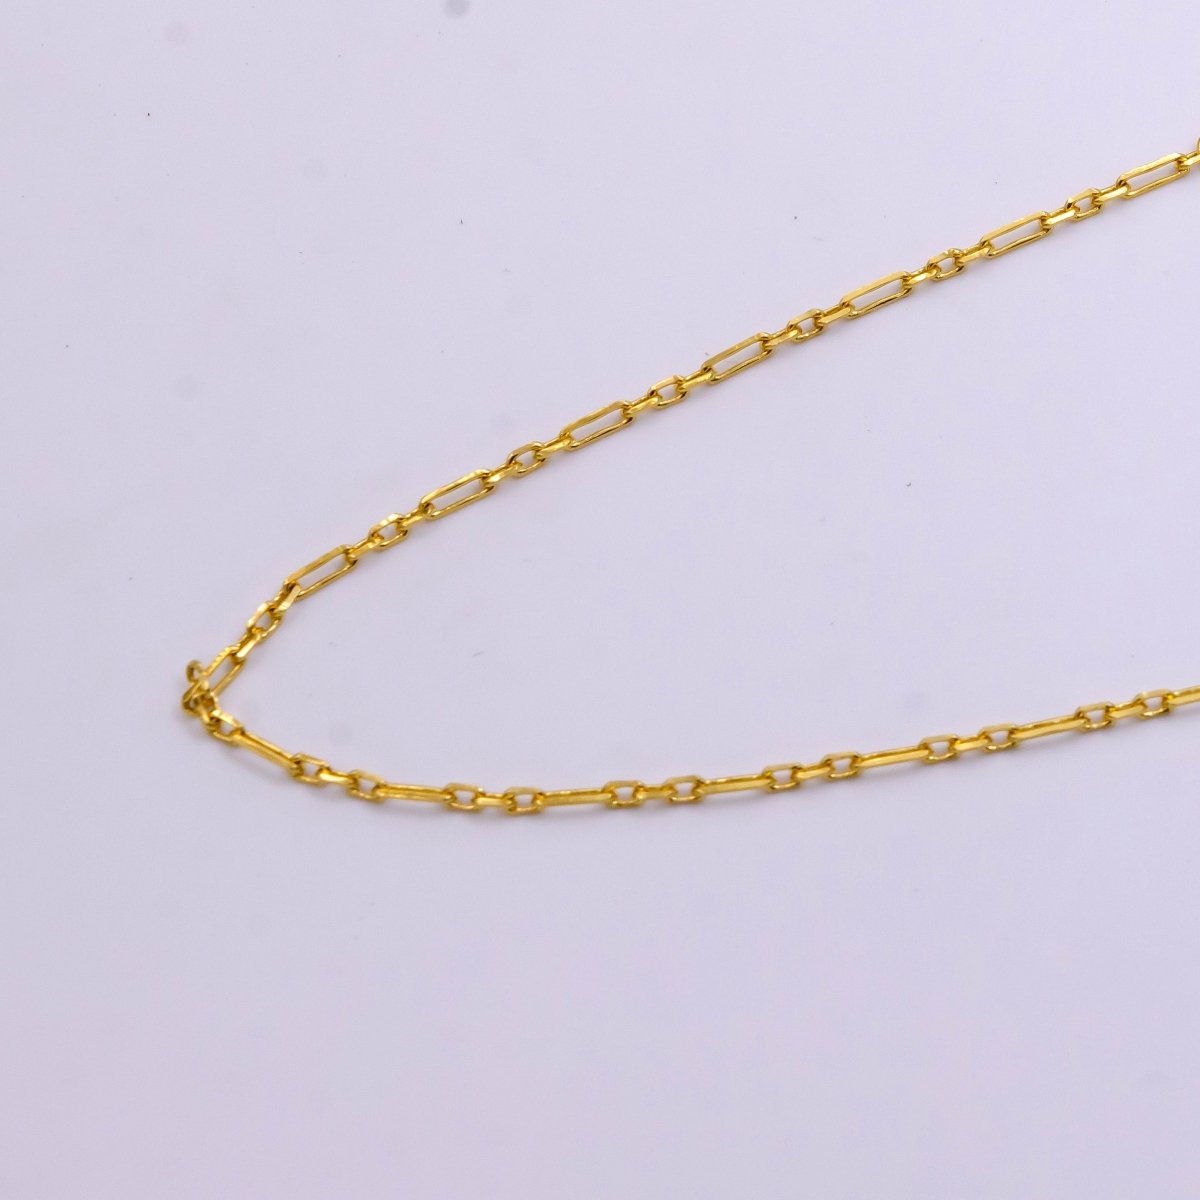 14K Gold Filled 2mm Paperclip Cable Link 30 Inch Chain Necklace w. Extender | WA-2443 - DLUXCA